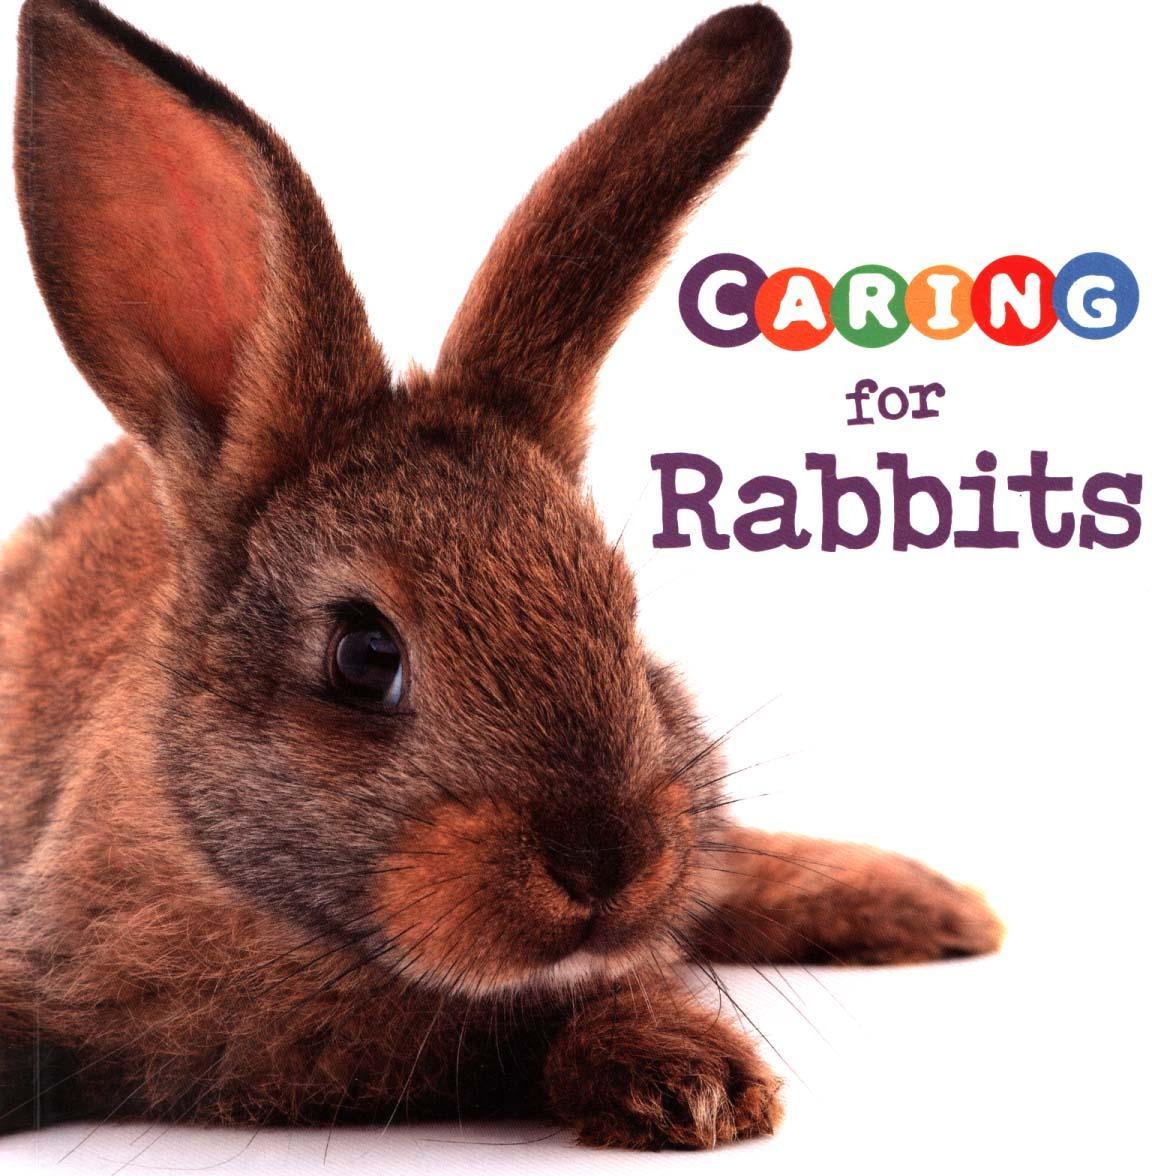 Caring for Rabbits